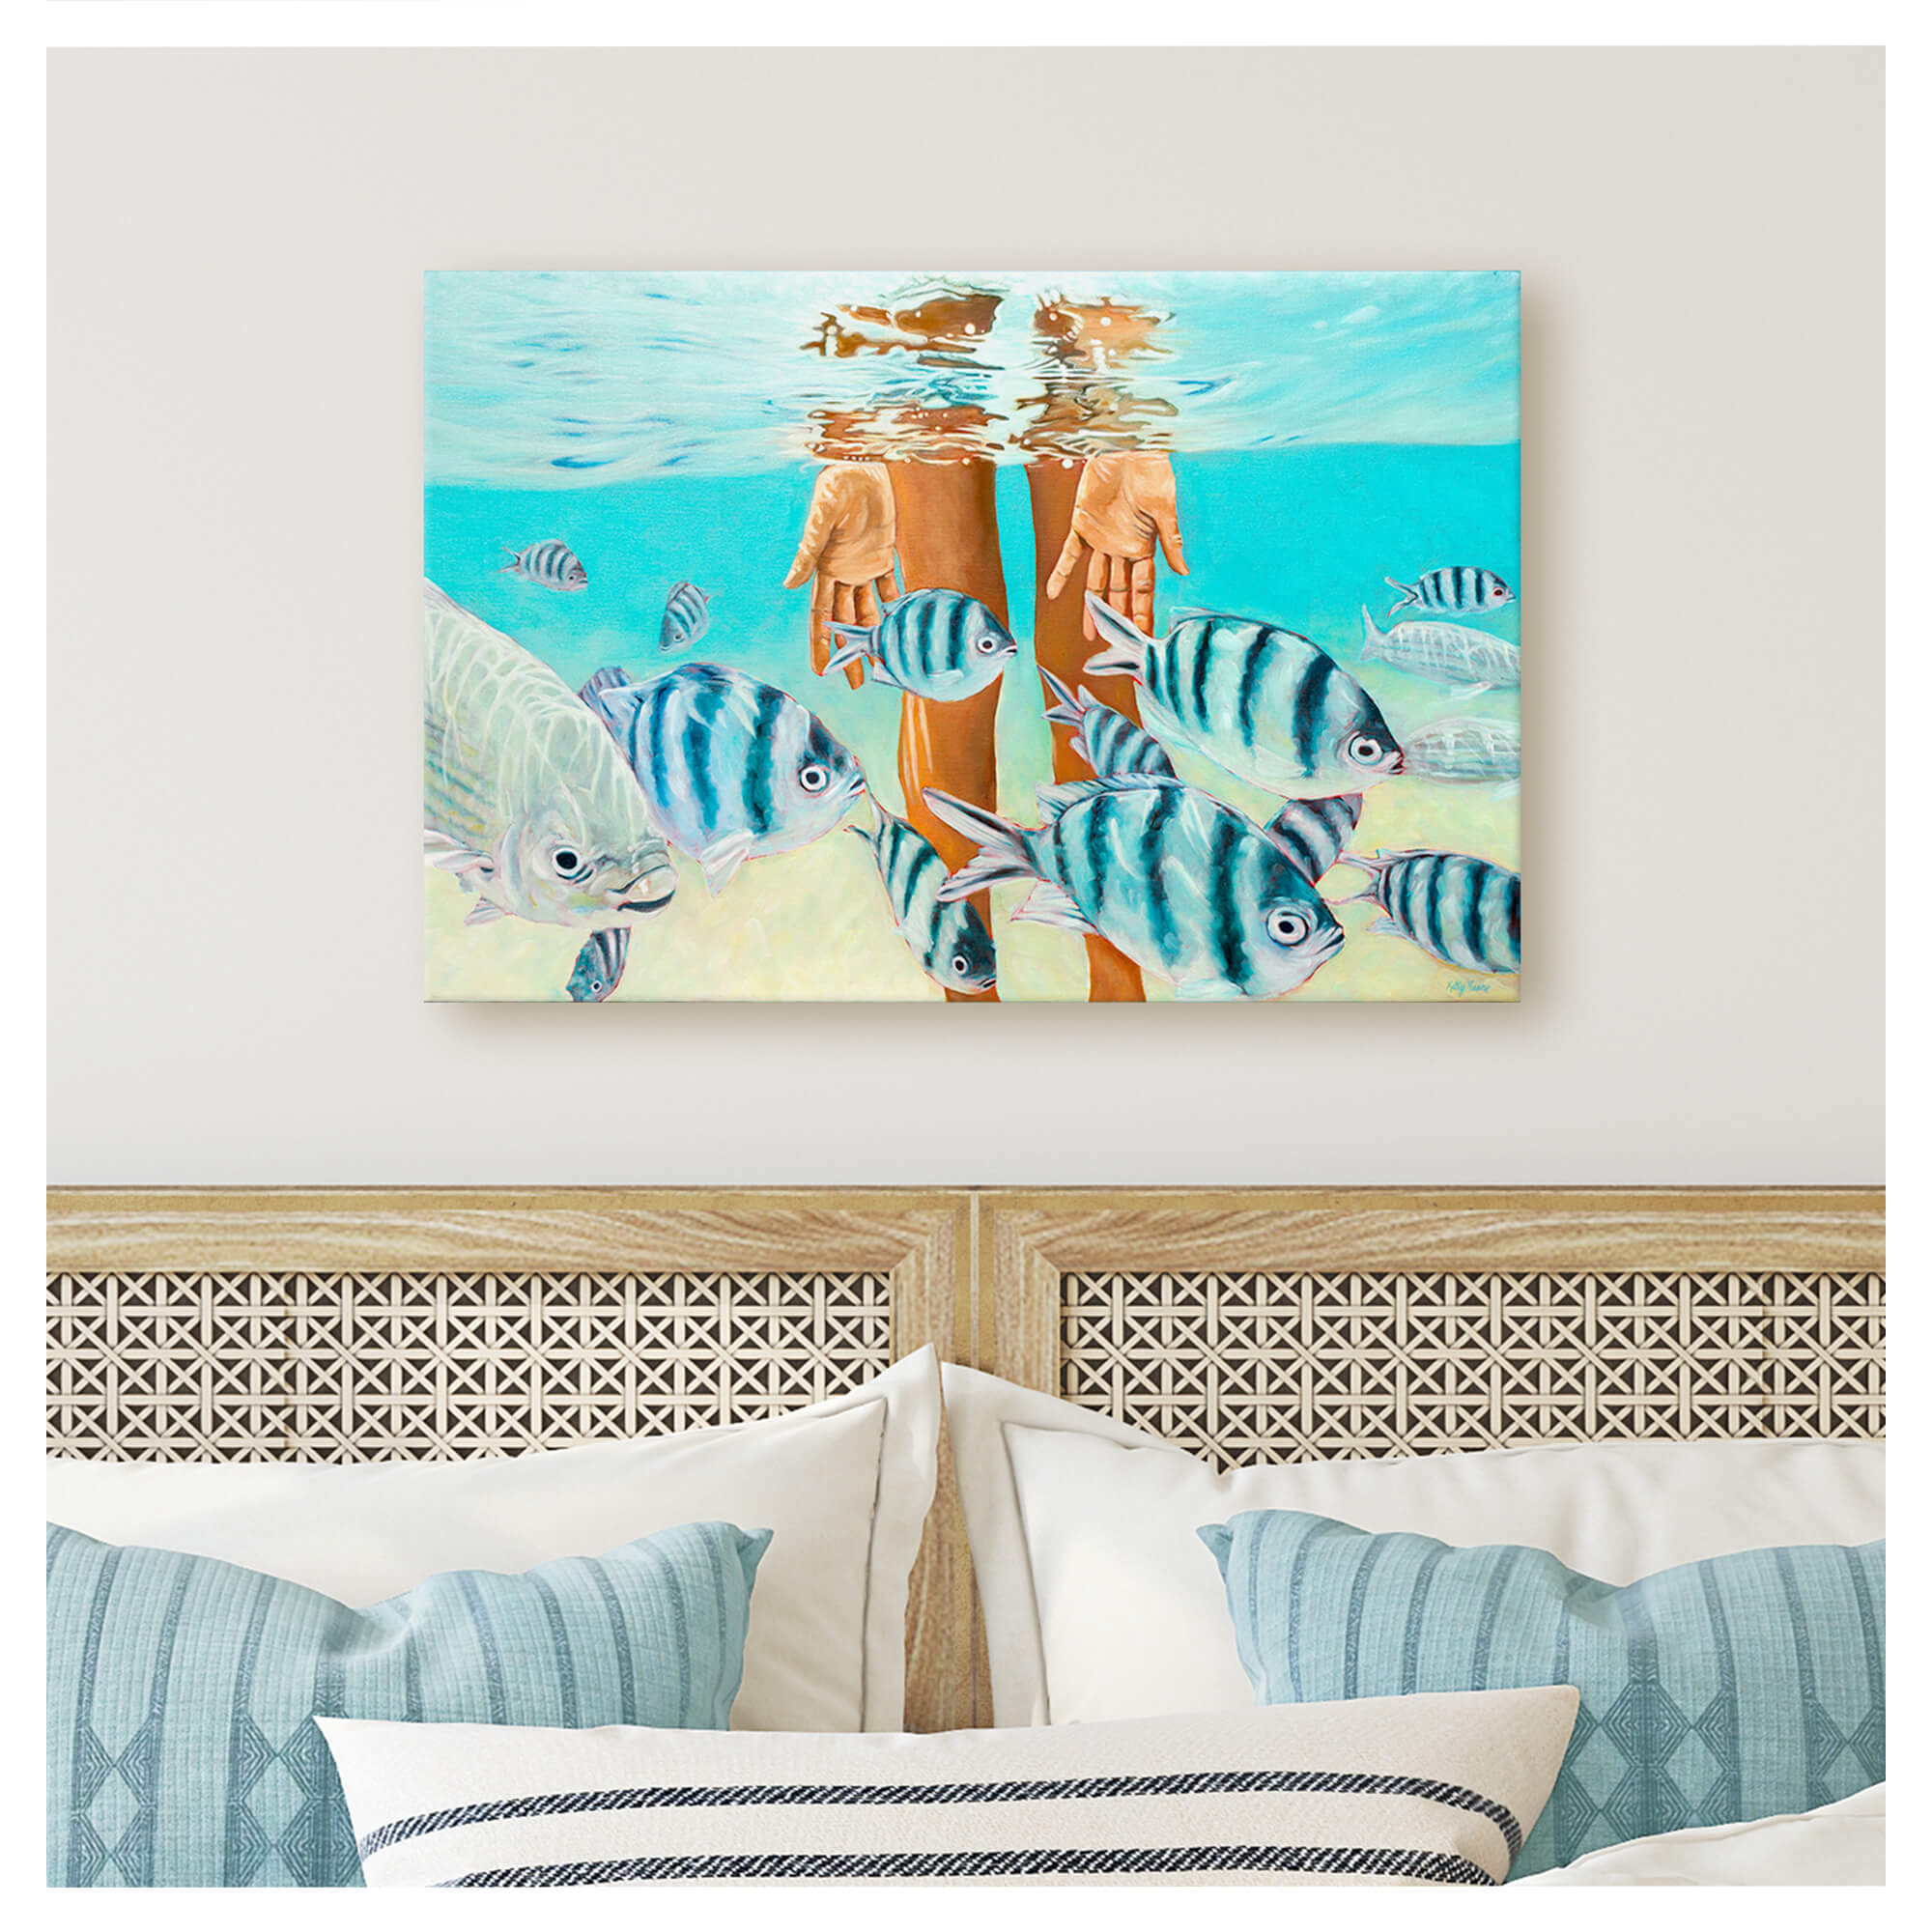 Canvas art print featuring a group of blue fish  by hawaii artist Kelly Keane